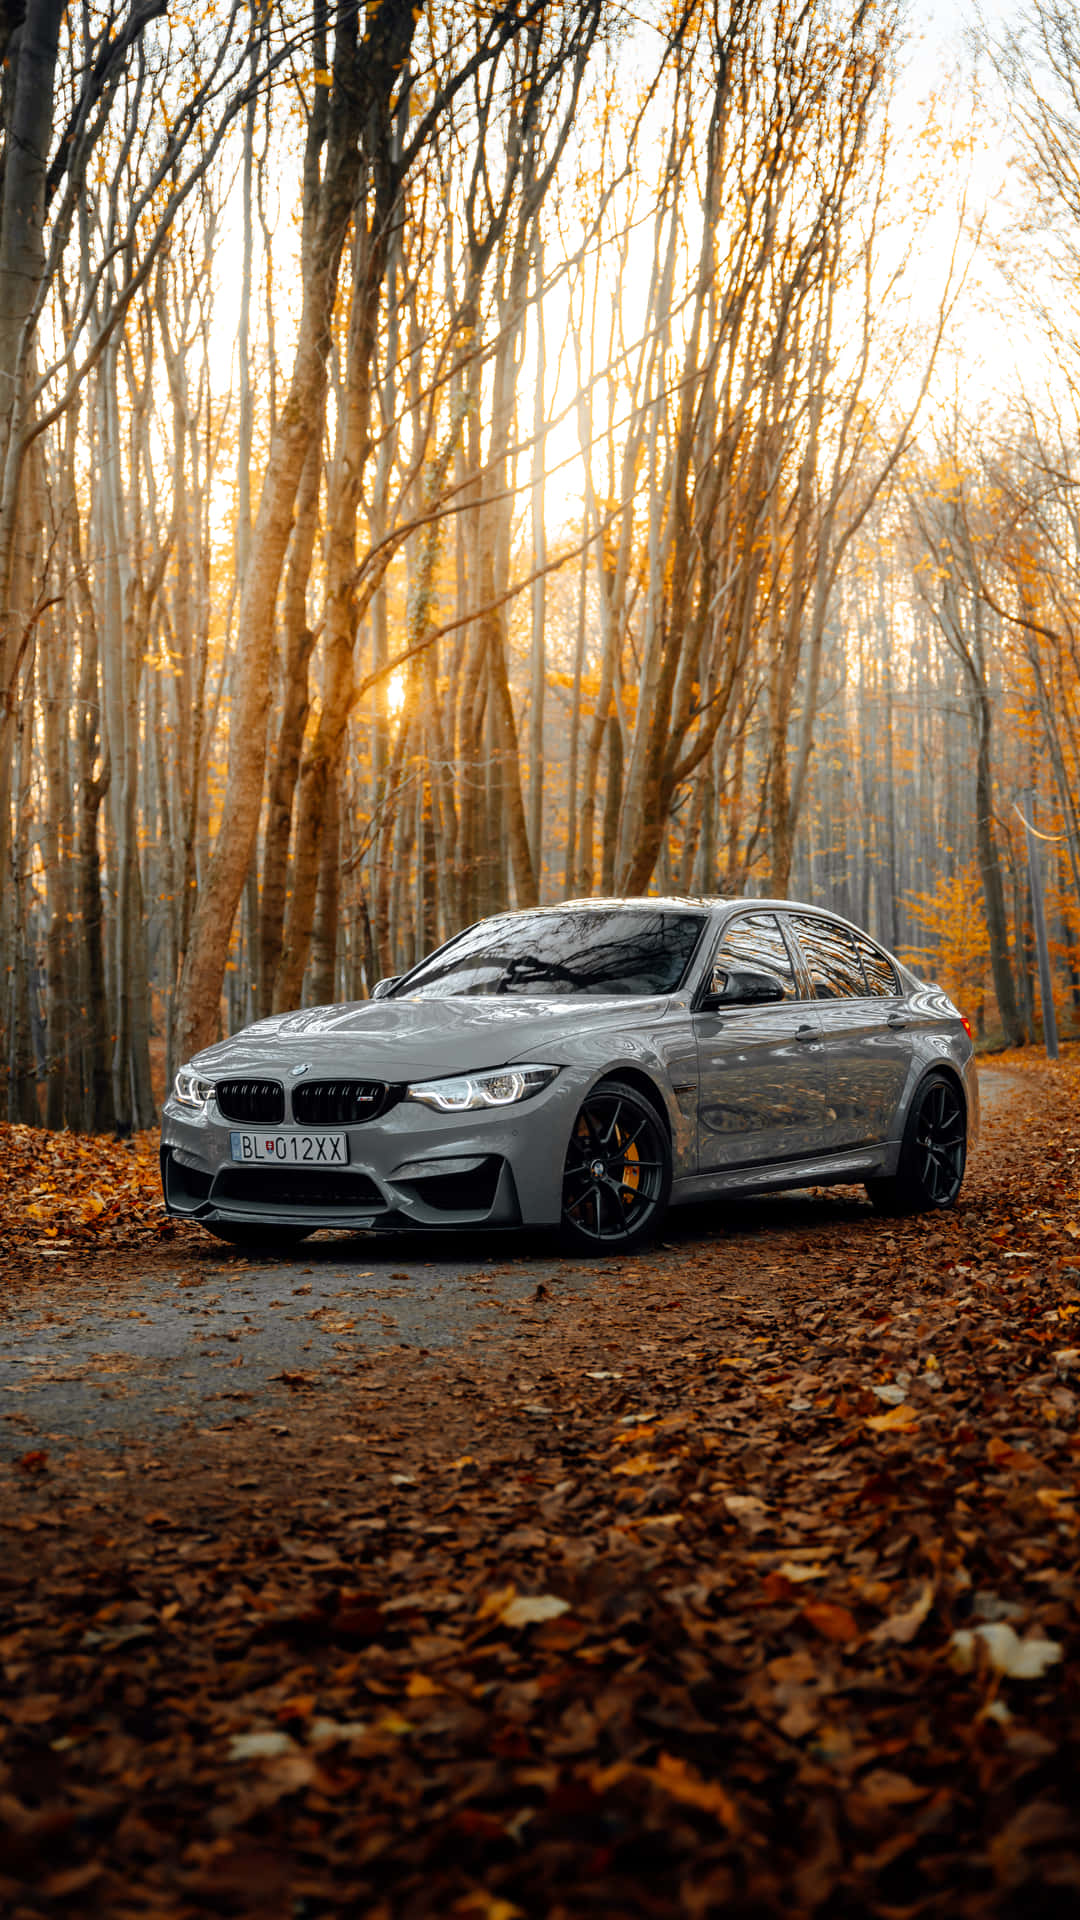 The Exotic BMW M8 in 4K Resolution Wallpaper